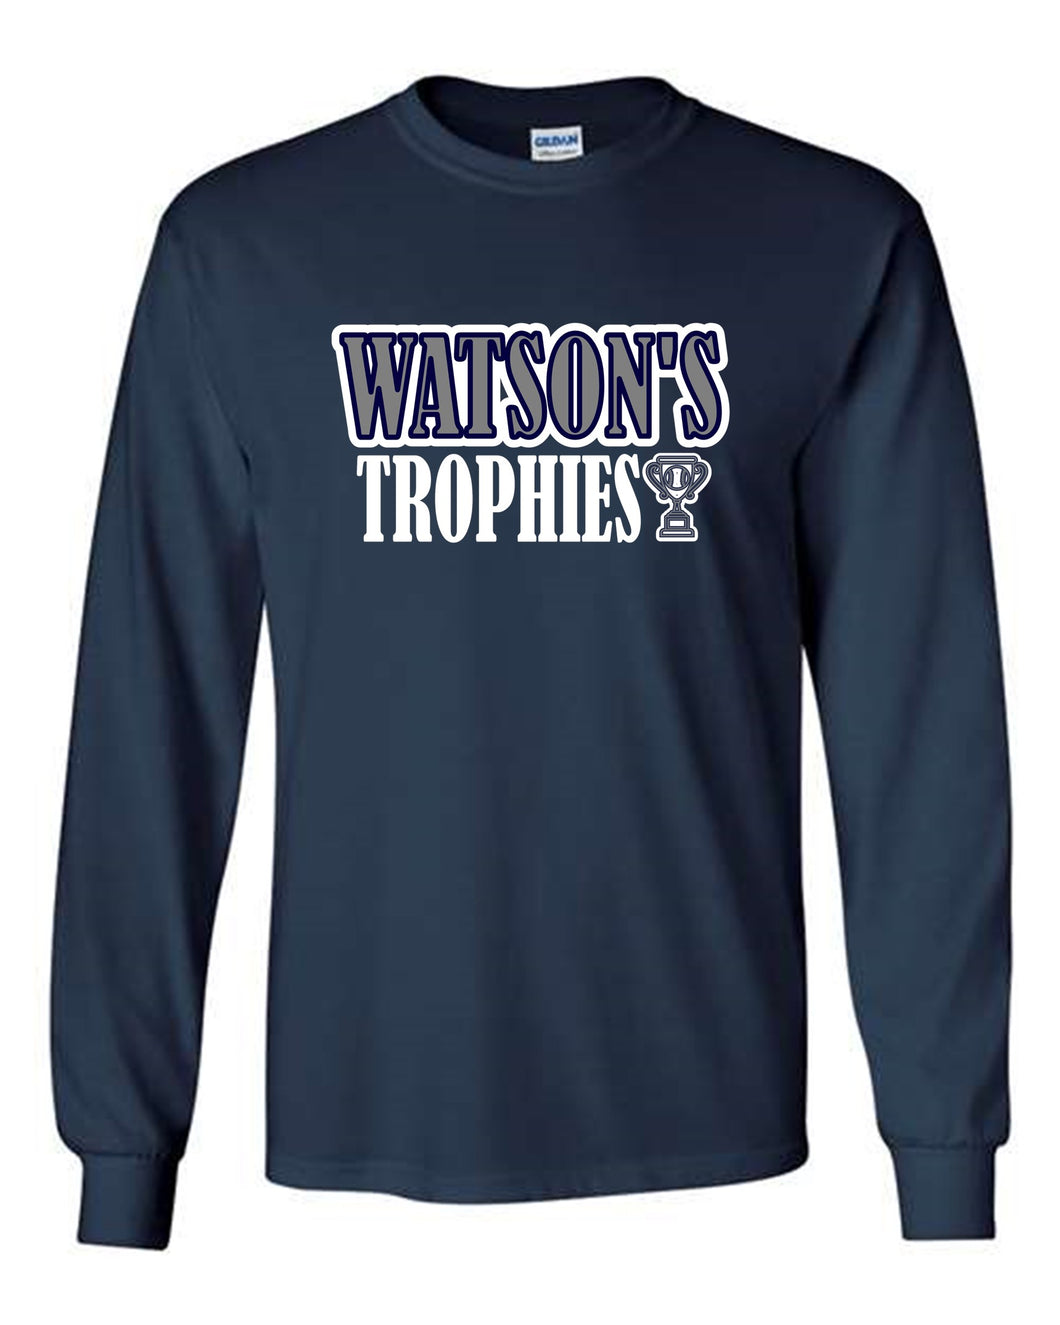 Watson's Trophies Long Sleeve - Youth and Adult